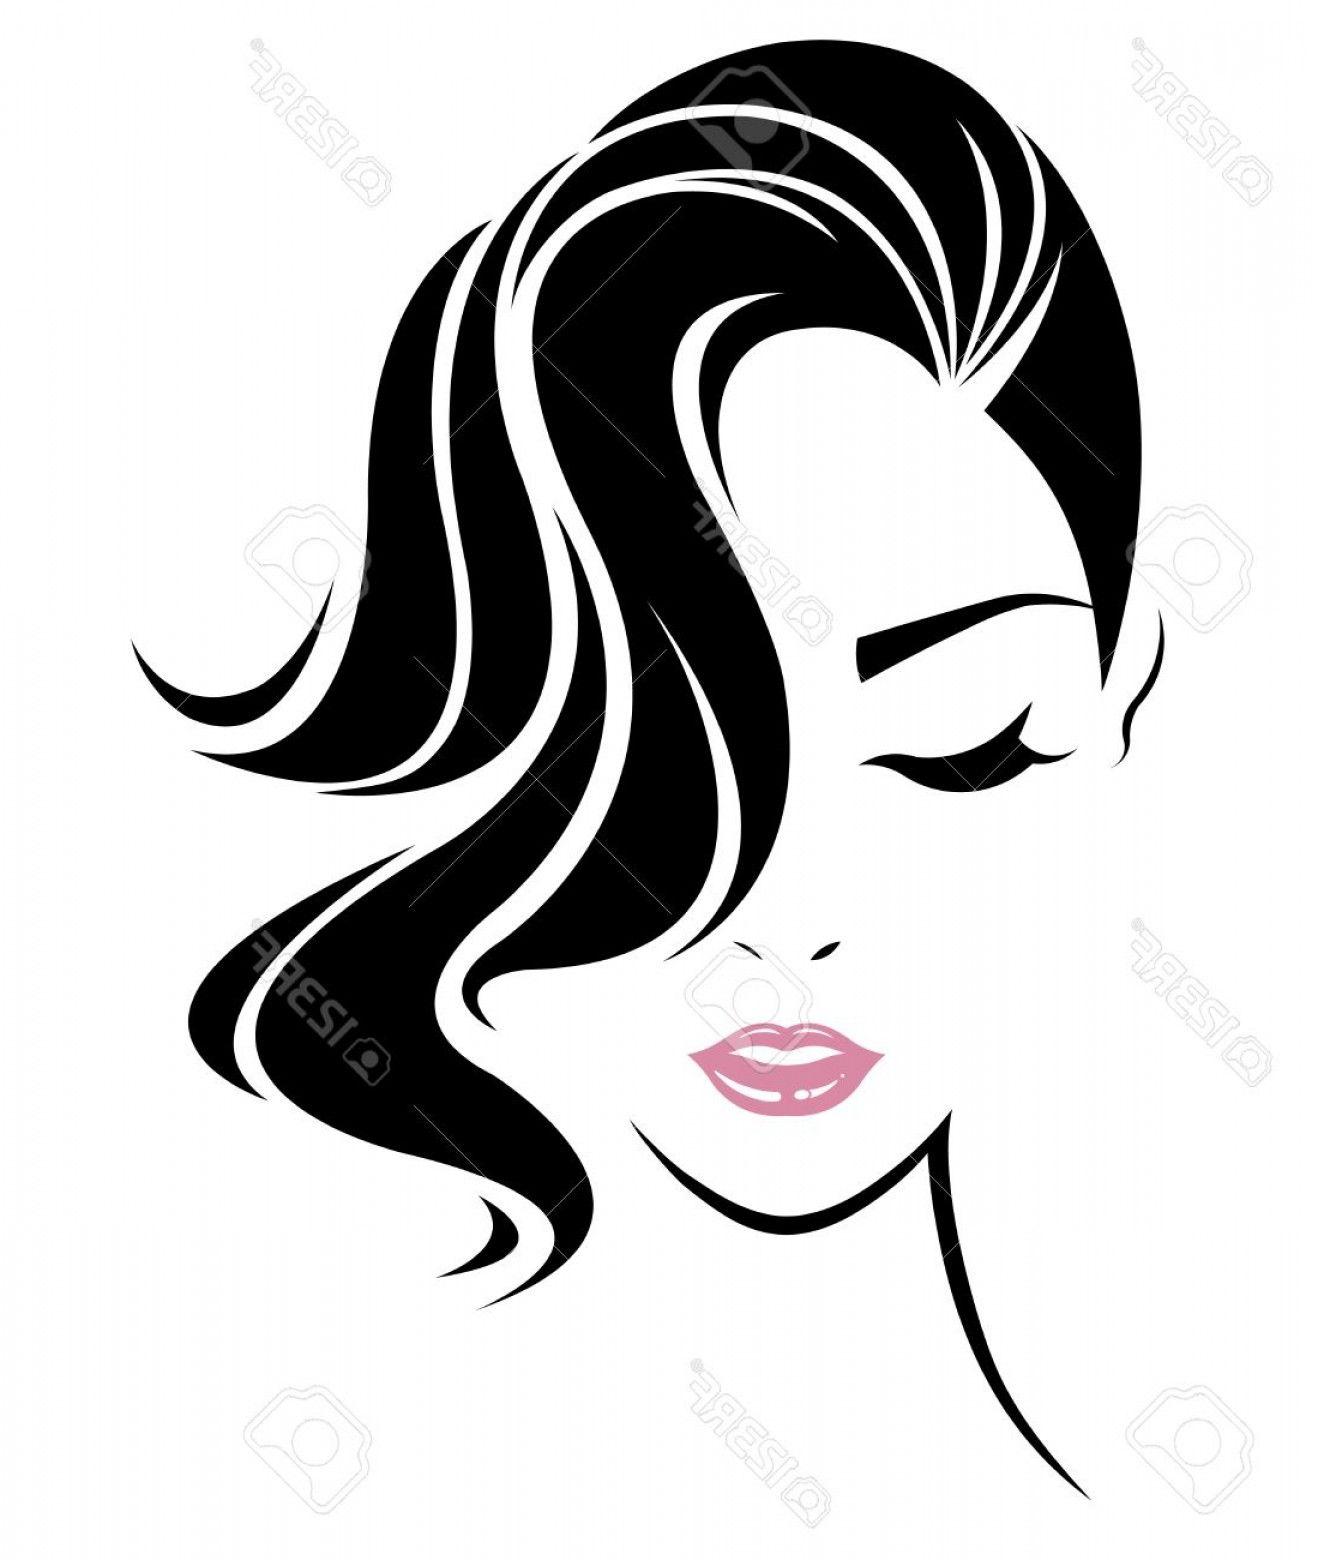 Girl Face Logo - Woman Hair Vector at GetDrawings.com | Free for personal use Woman ...